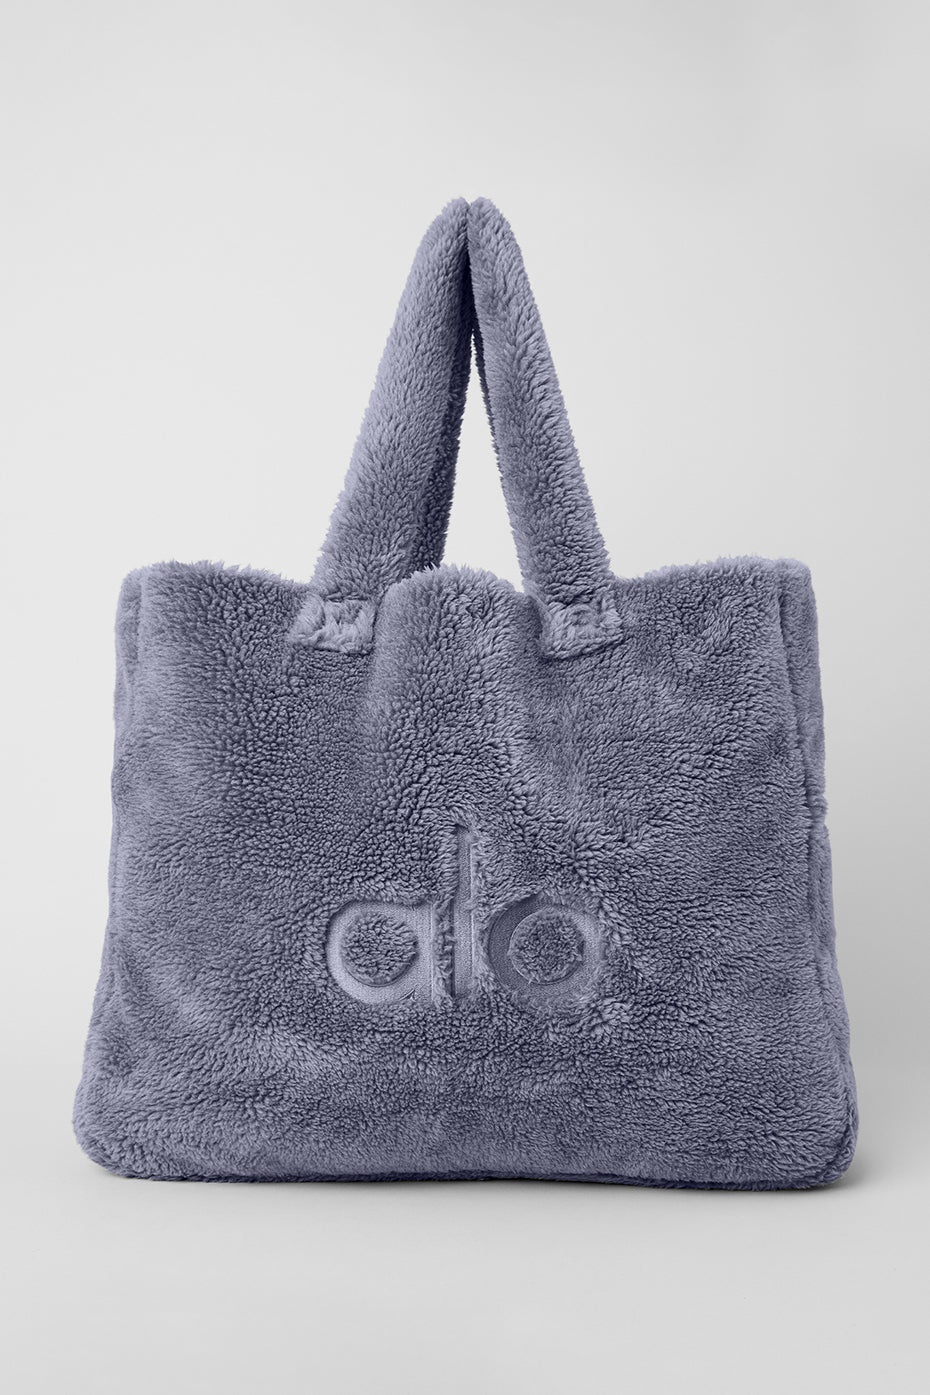 alo Yoga Shopper, Weekender, Travel Tote Ex-Large Light Weight